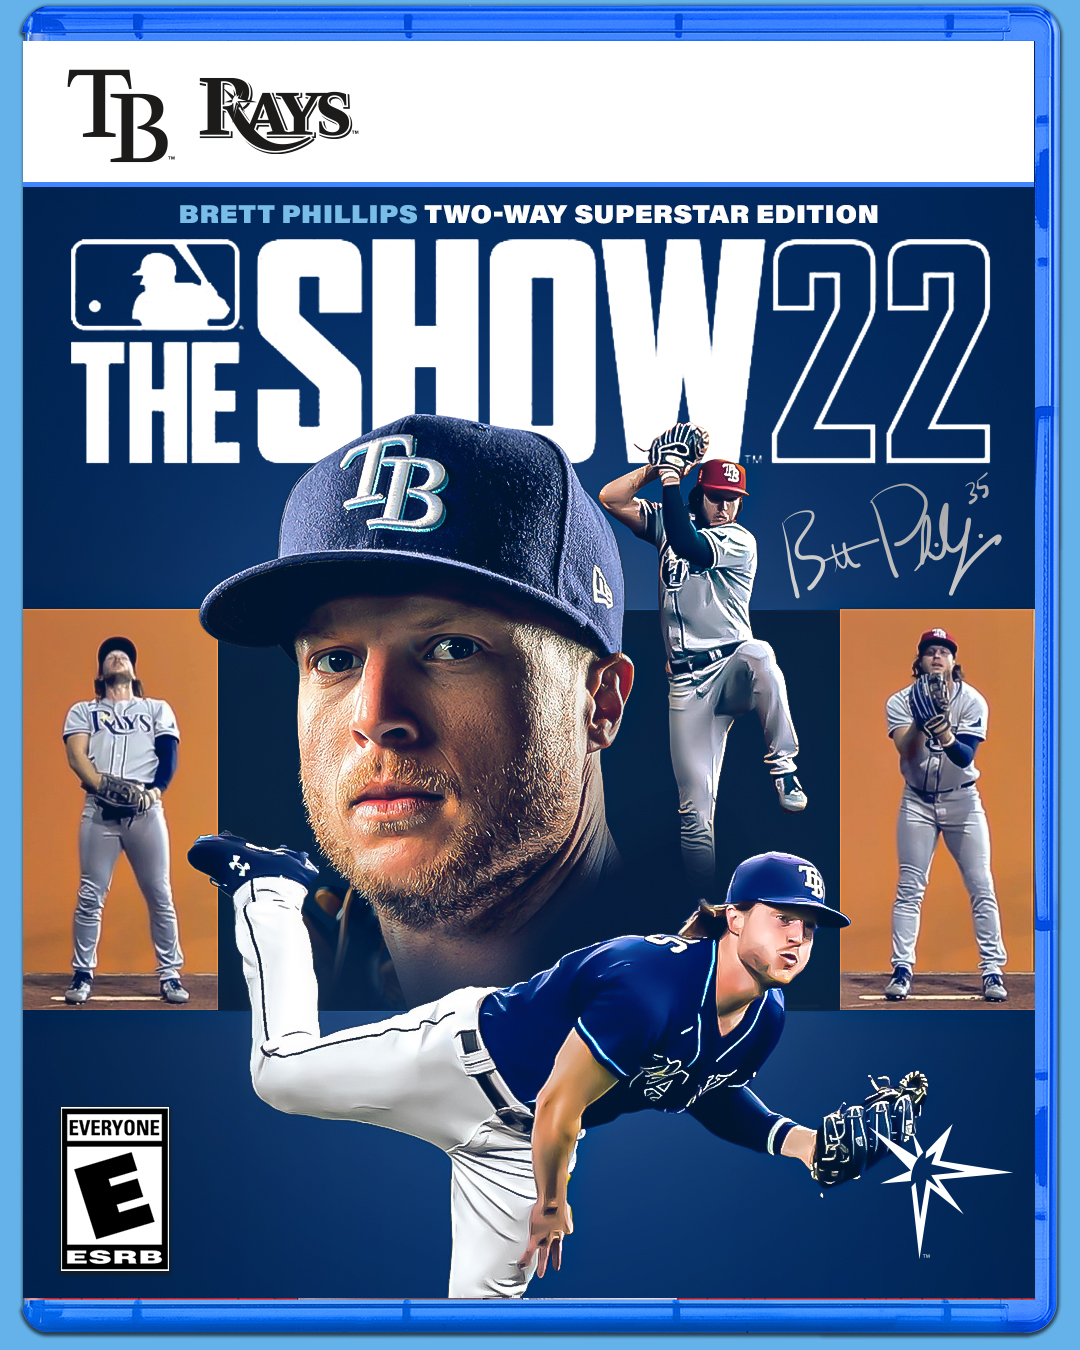 Tampa Bay Rays on X: Don't mind us dropping a special edition for